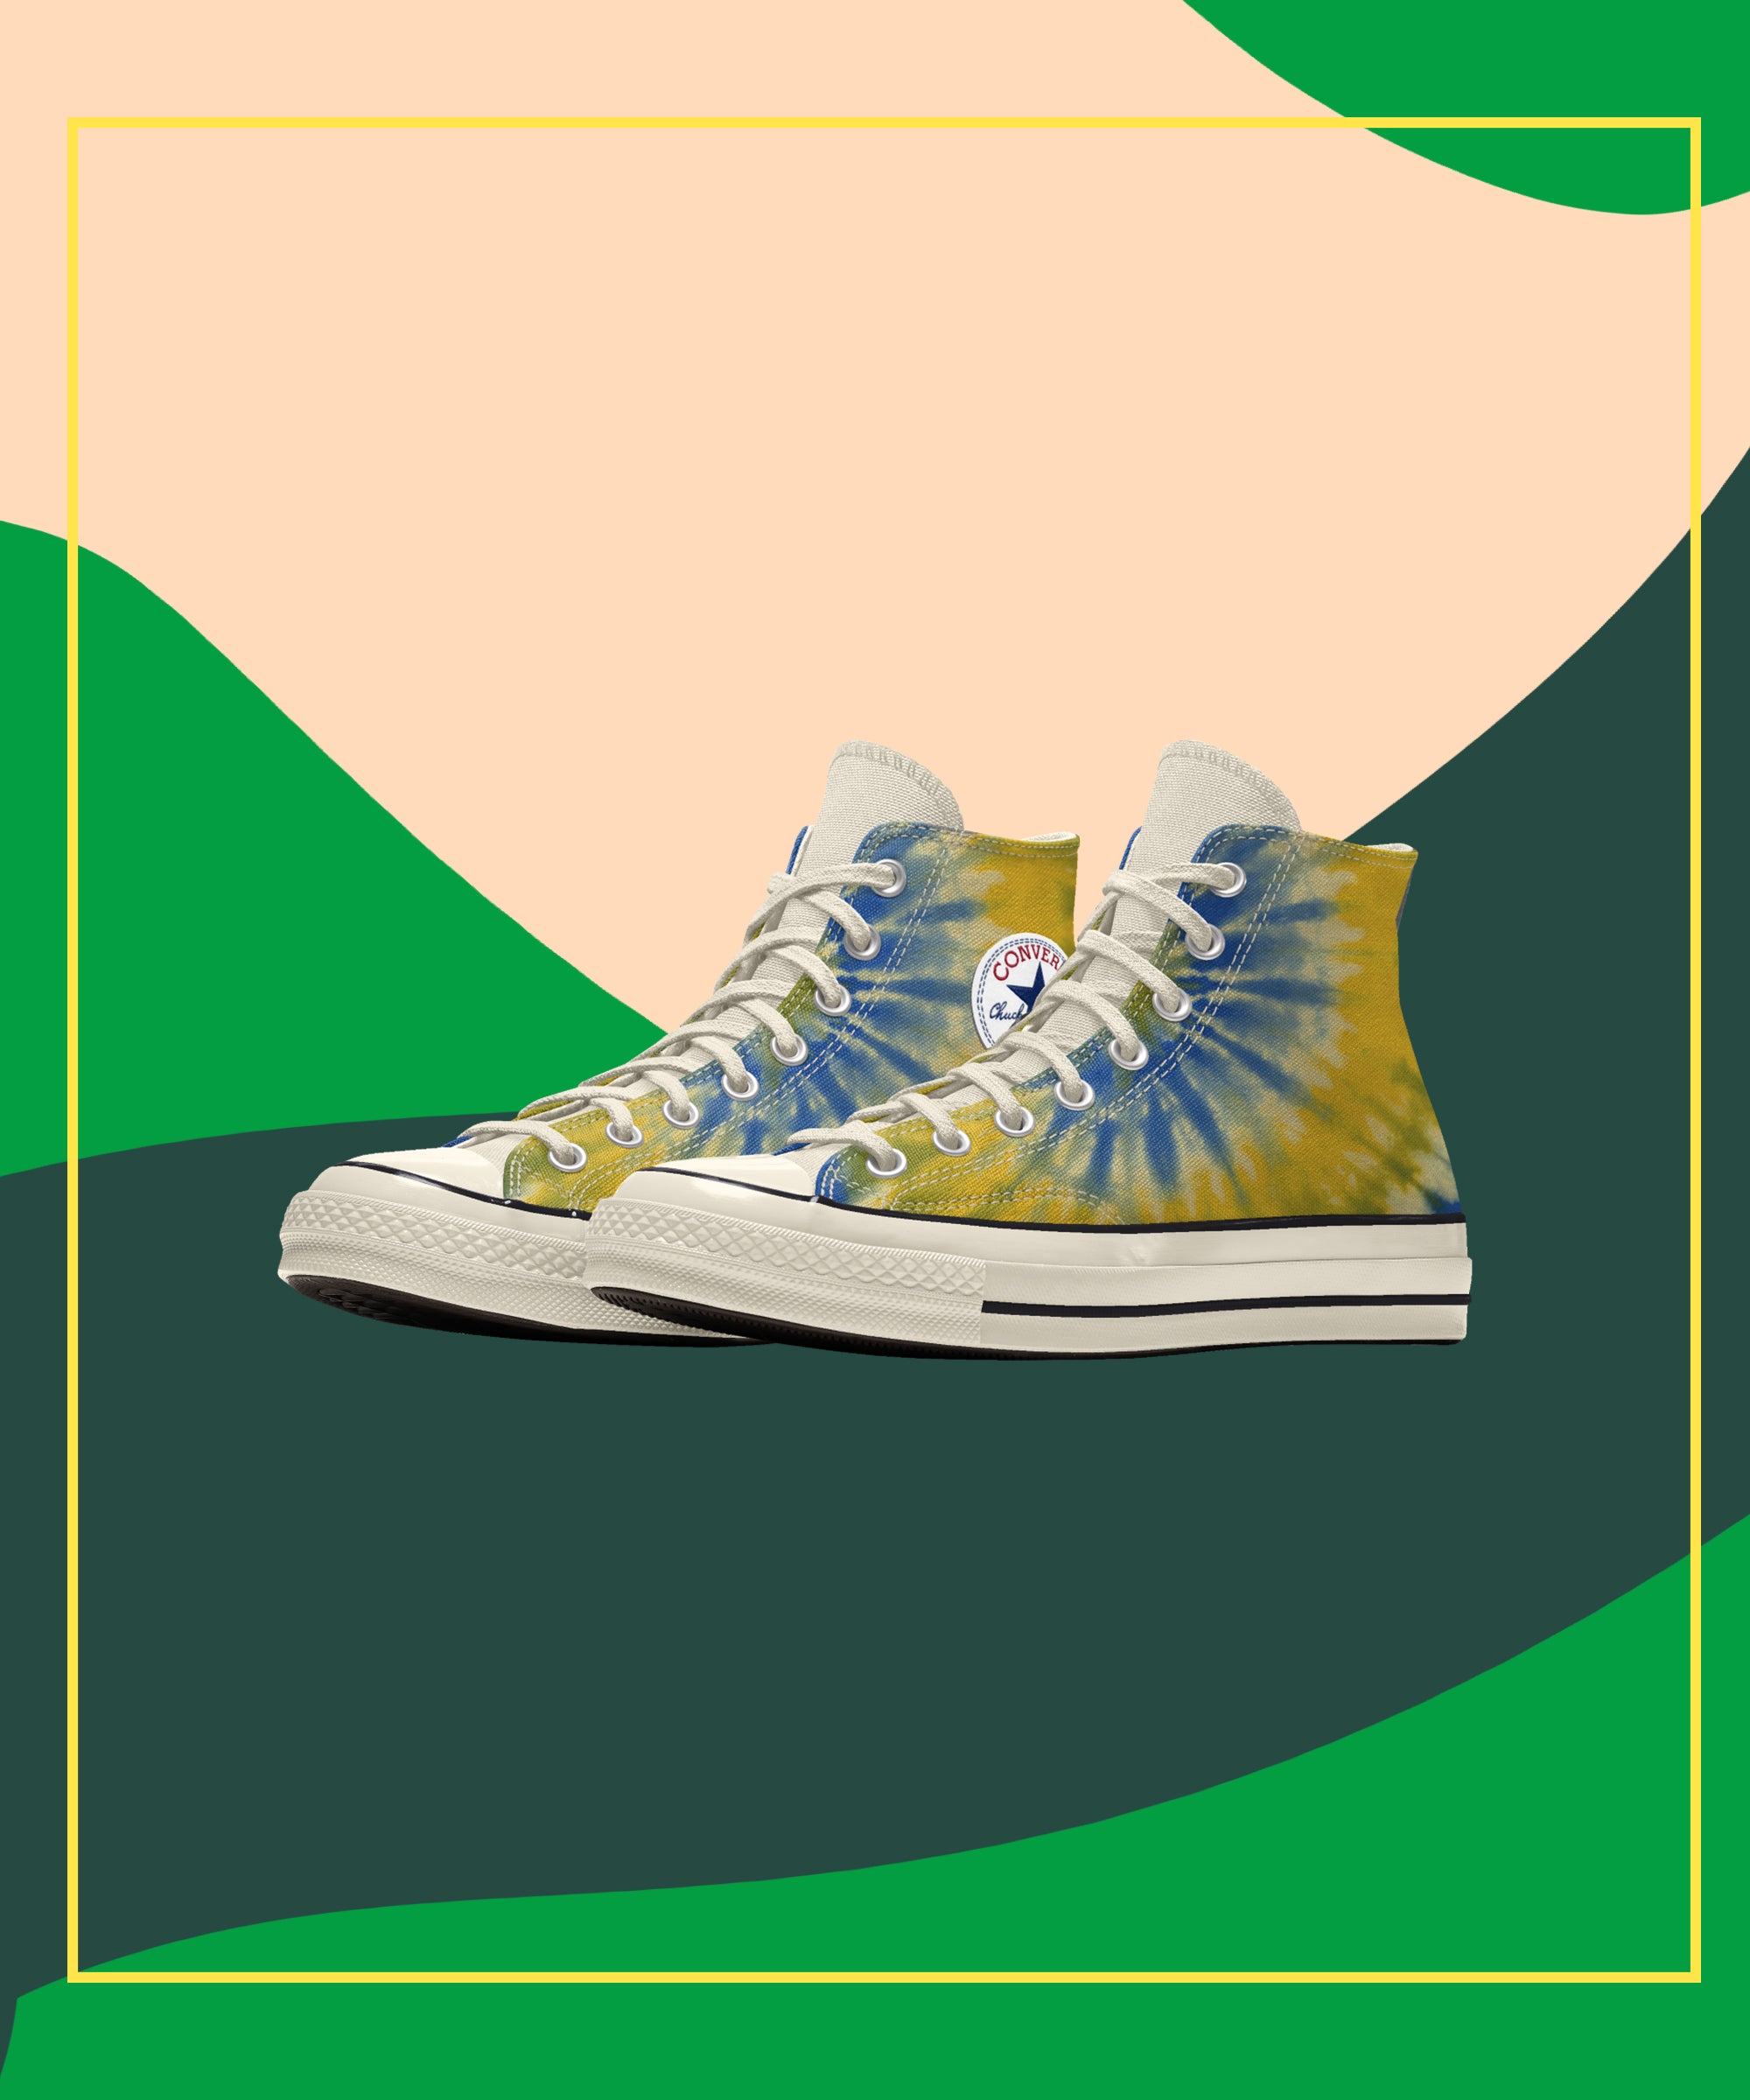 converse by mbb